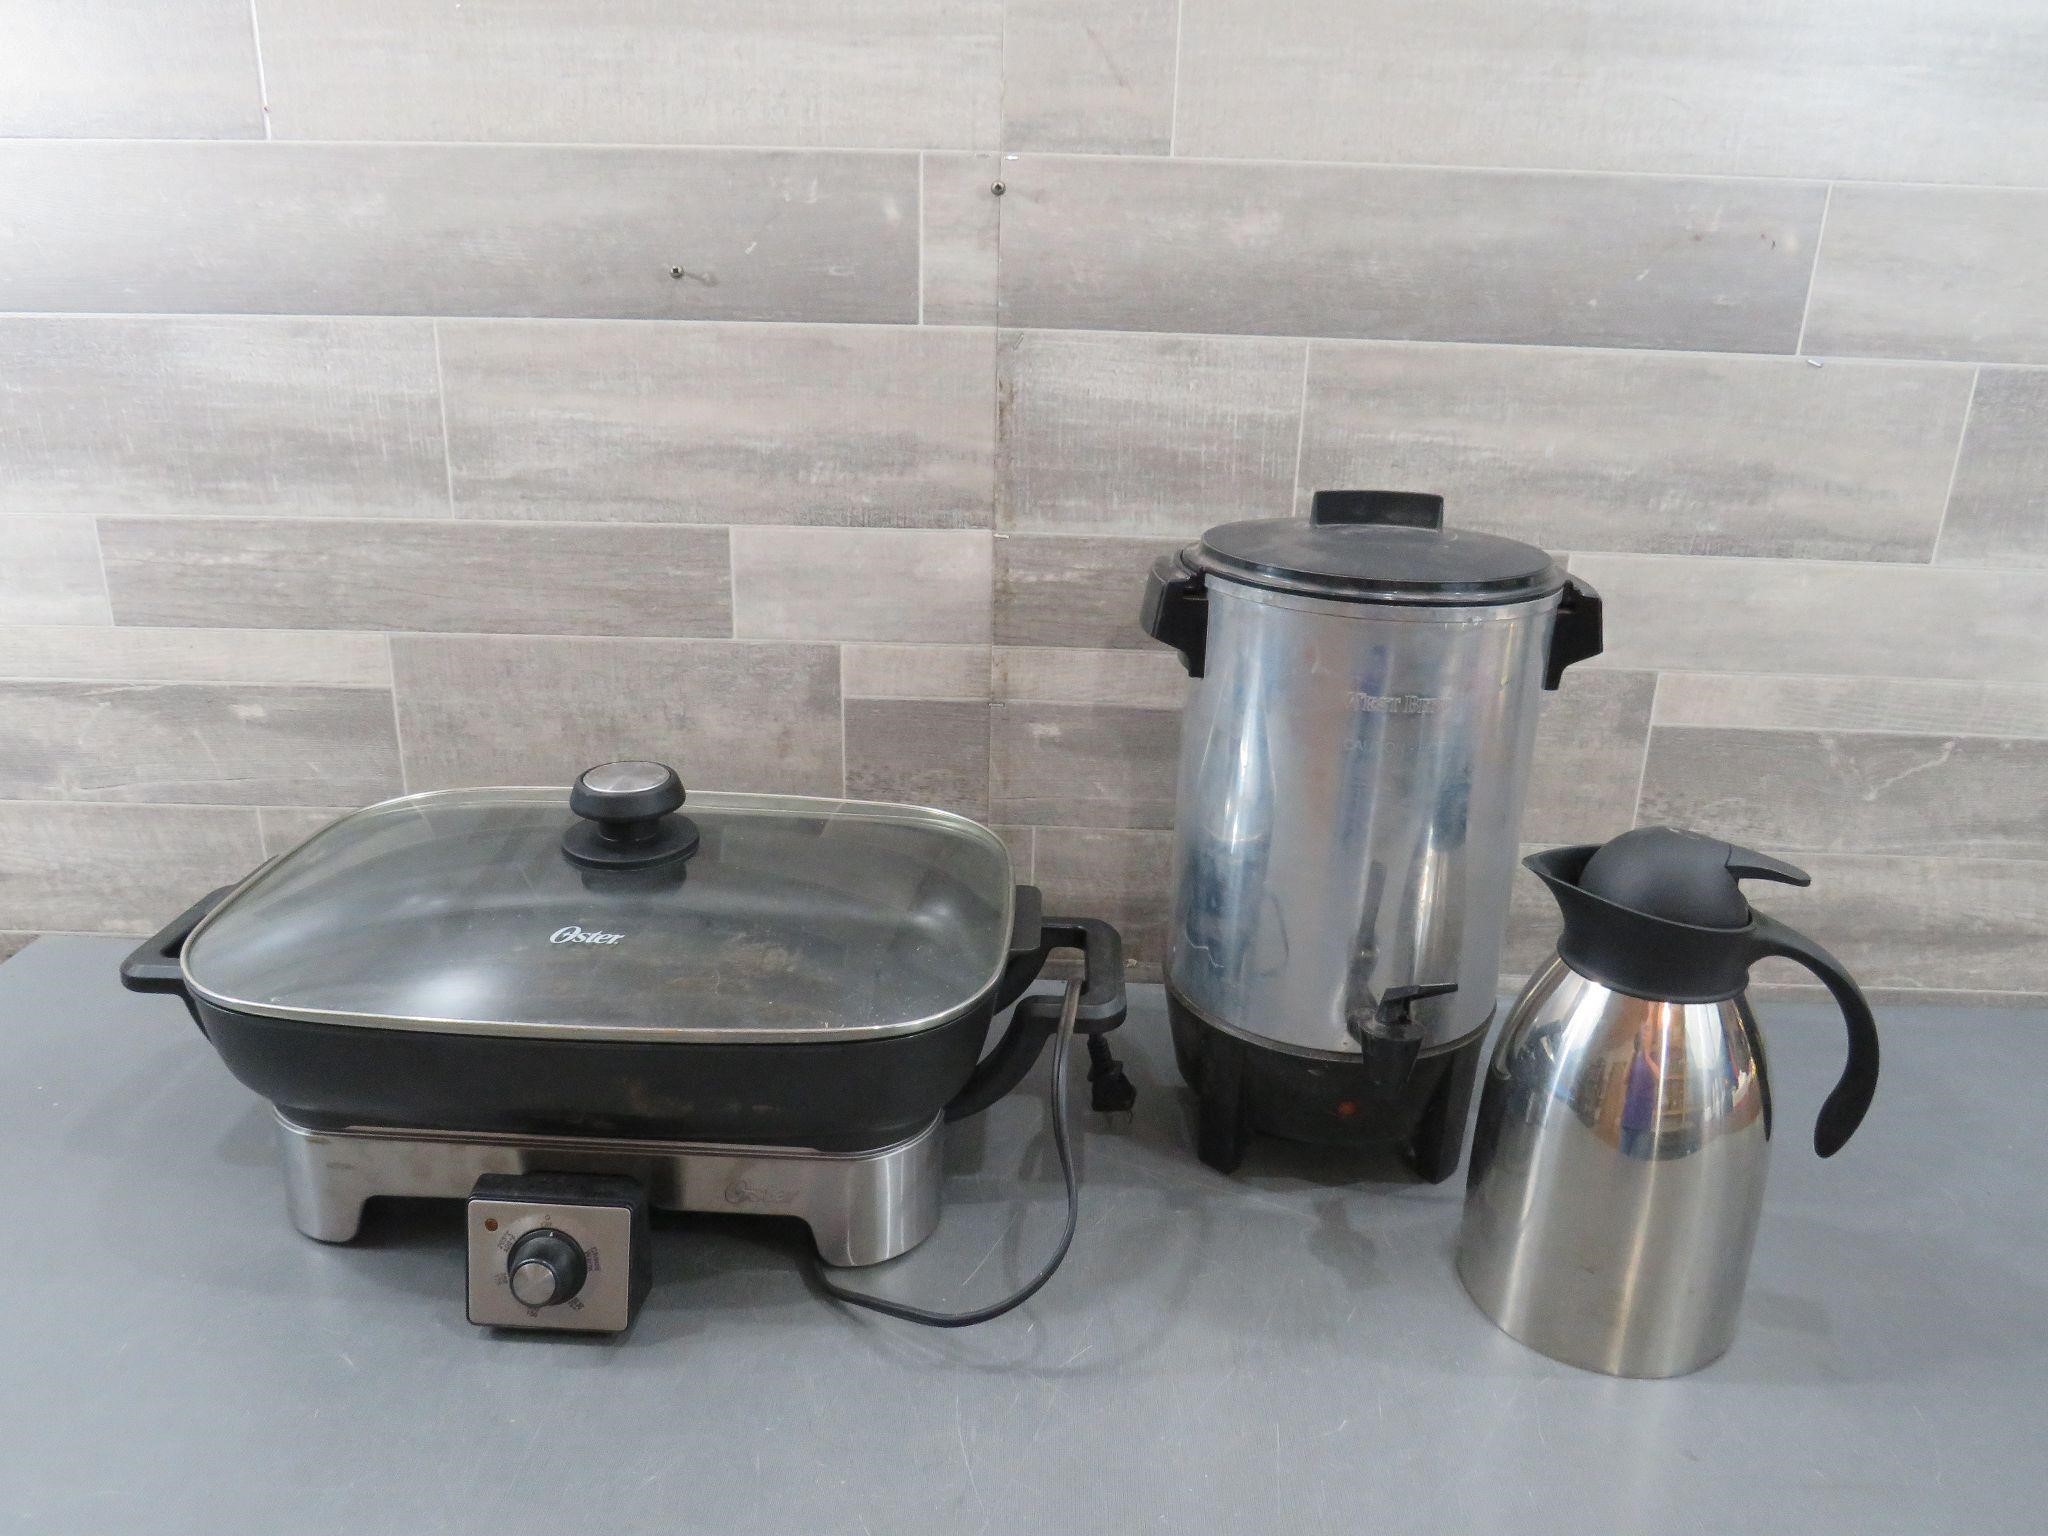 ELECTRIC FRYING PAN / WESTBEND COFFEE MAKER